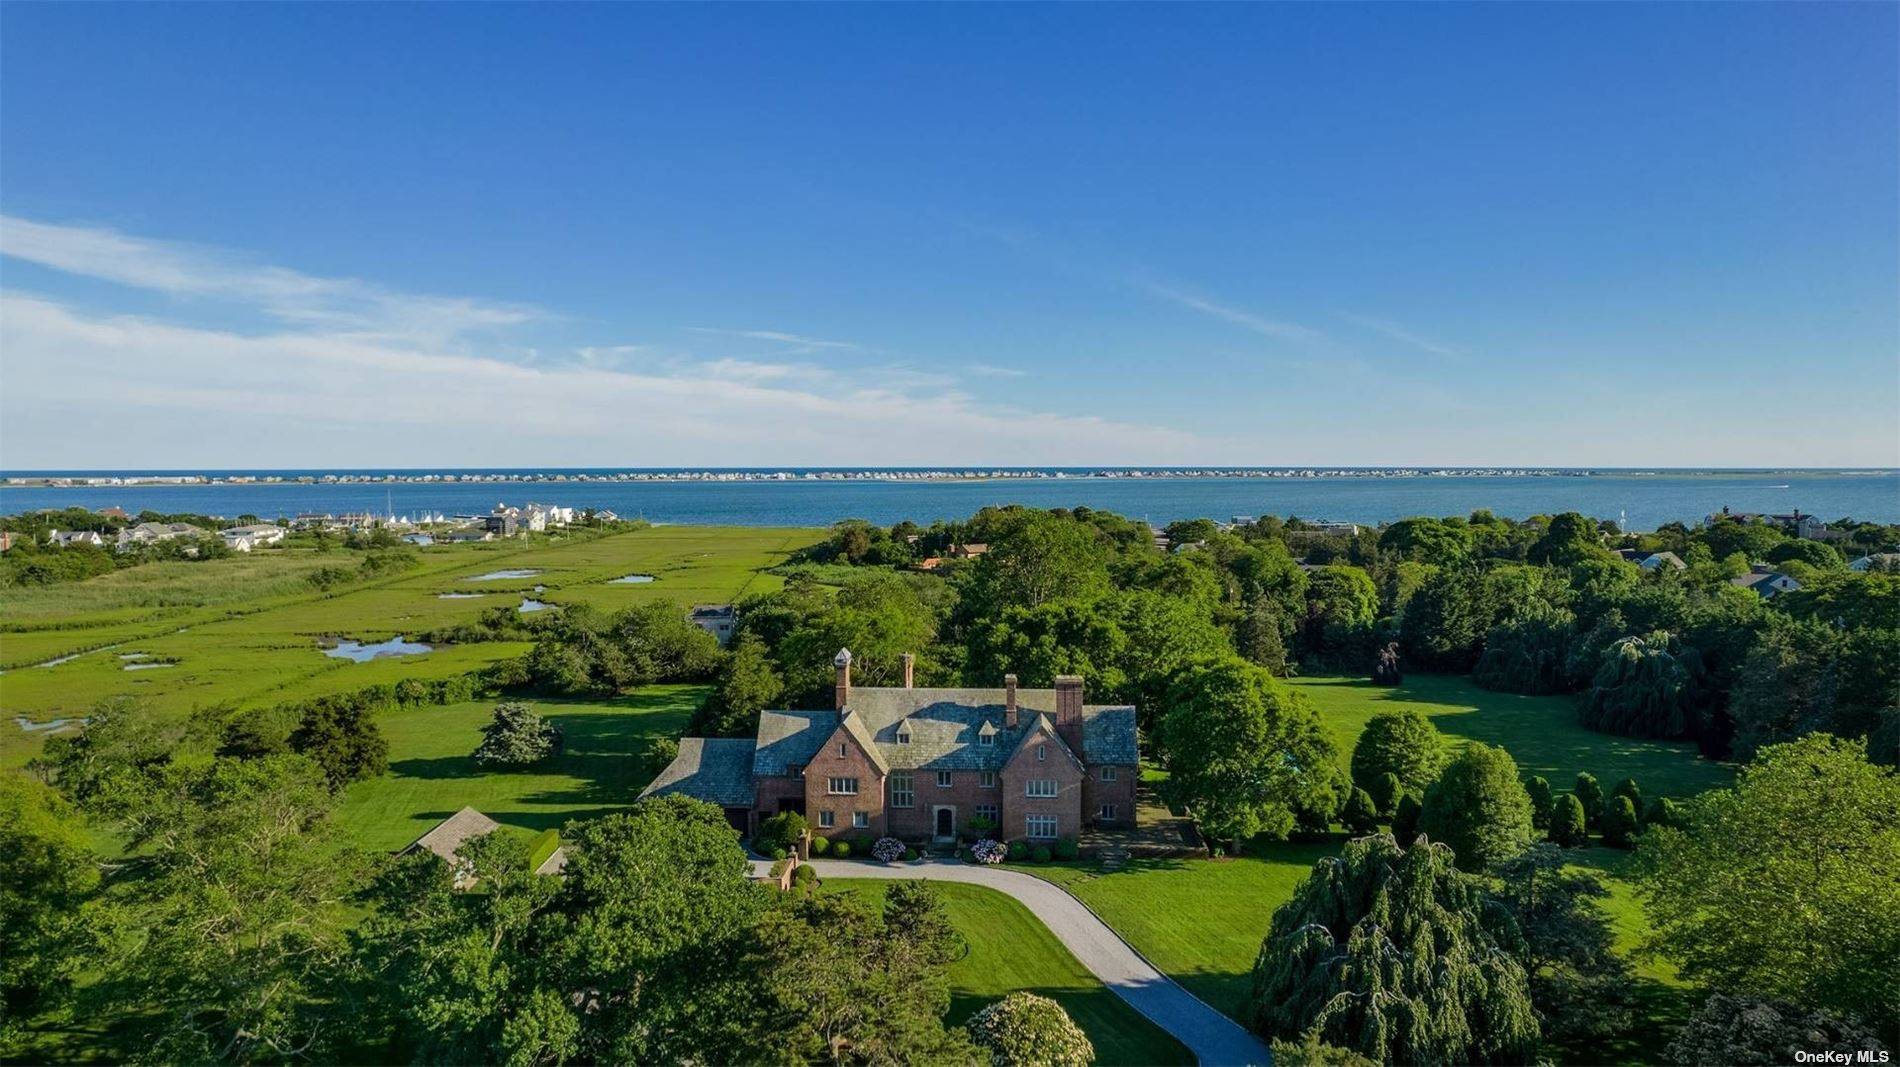 Take a Look Inside this Picturesque Hamptons Estate.